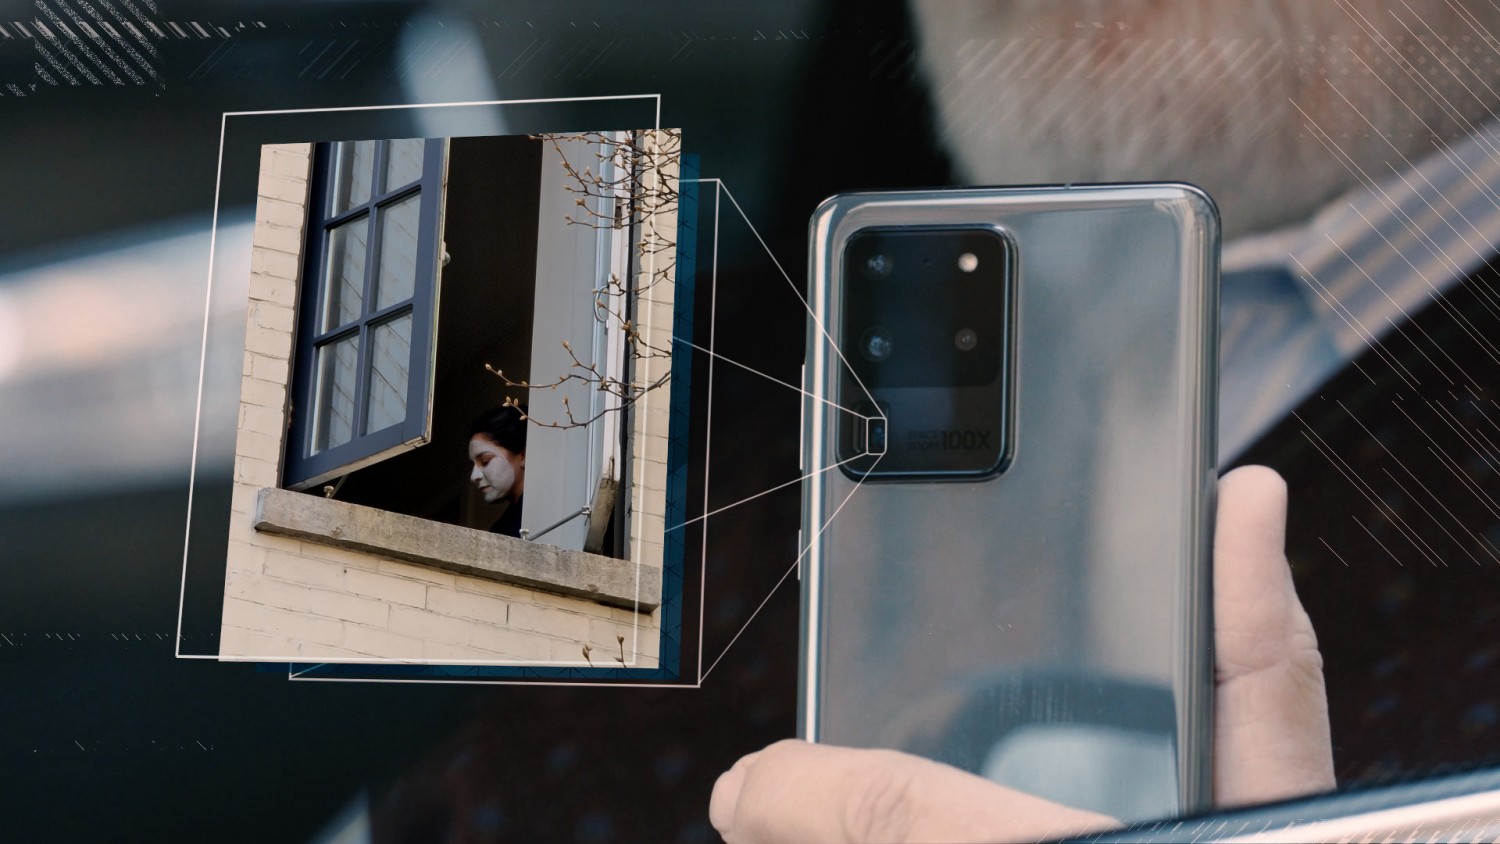 Samsung's Galaxy S20 Ultra provides up to 100X digital zoom, but who needs that kind of snooping power? A private investigator, that's who. WSJ's Joanna Stern teamed up with a New York-based detective to test it and compare it to other phon